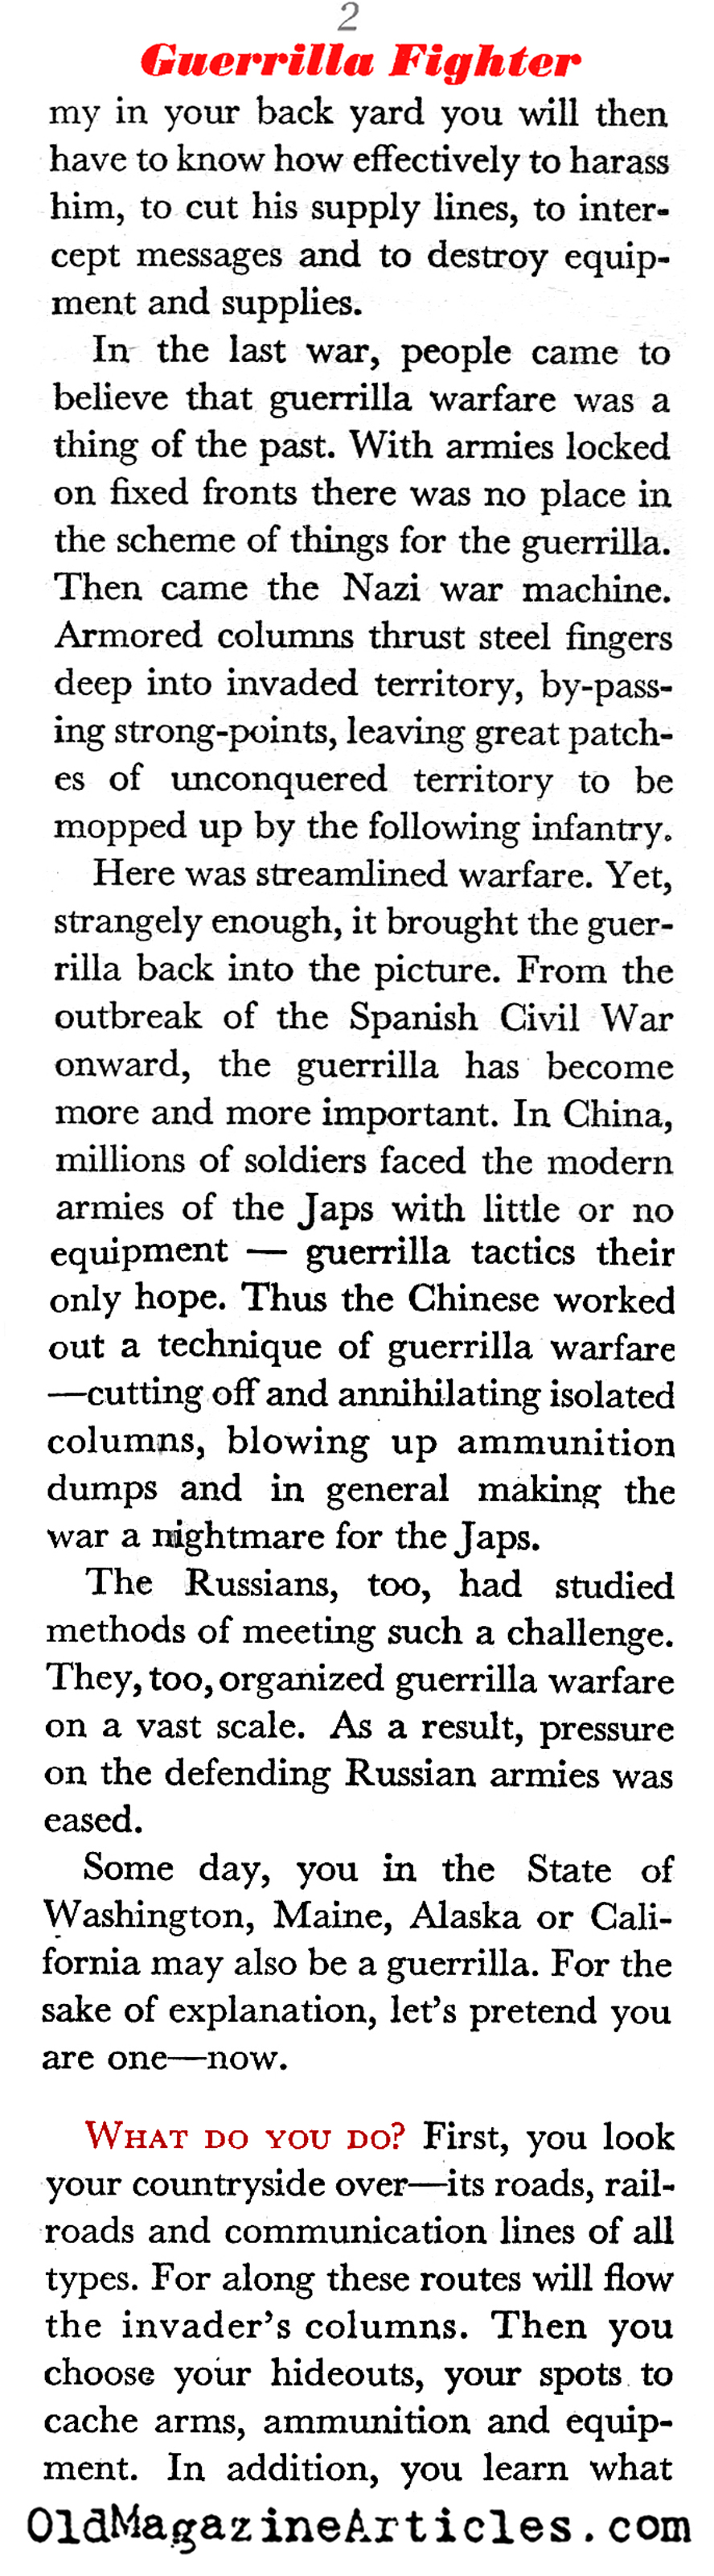 So, You Want to Be a Guerrilla? (Coronet Magazine, 1942)